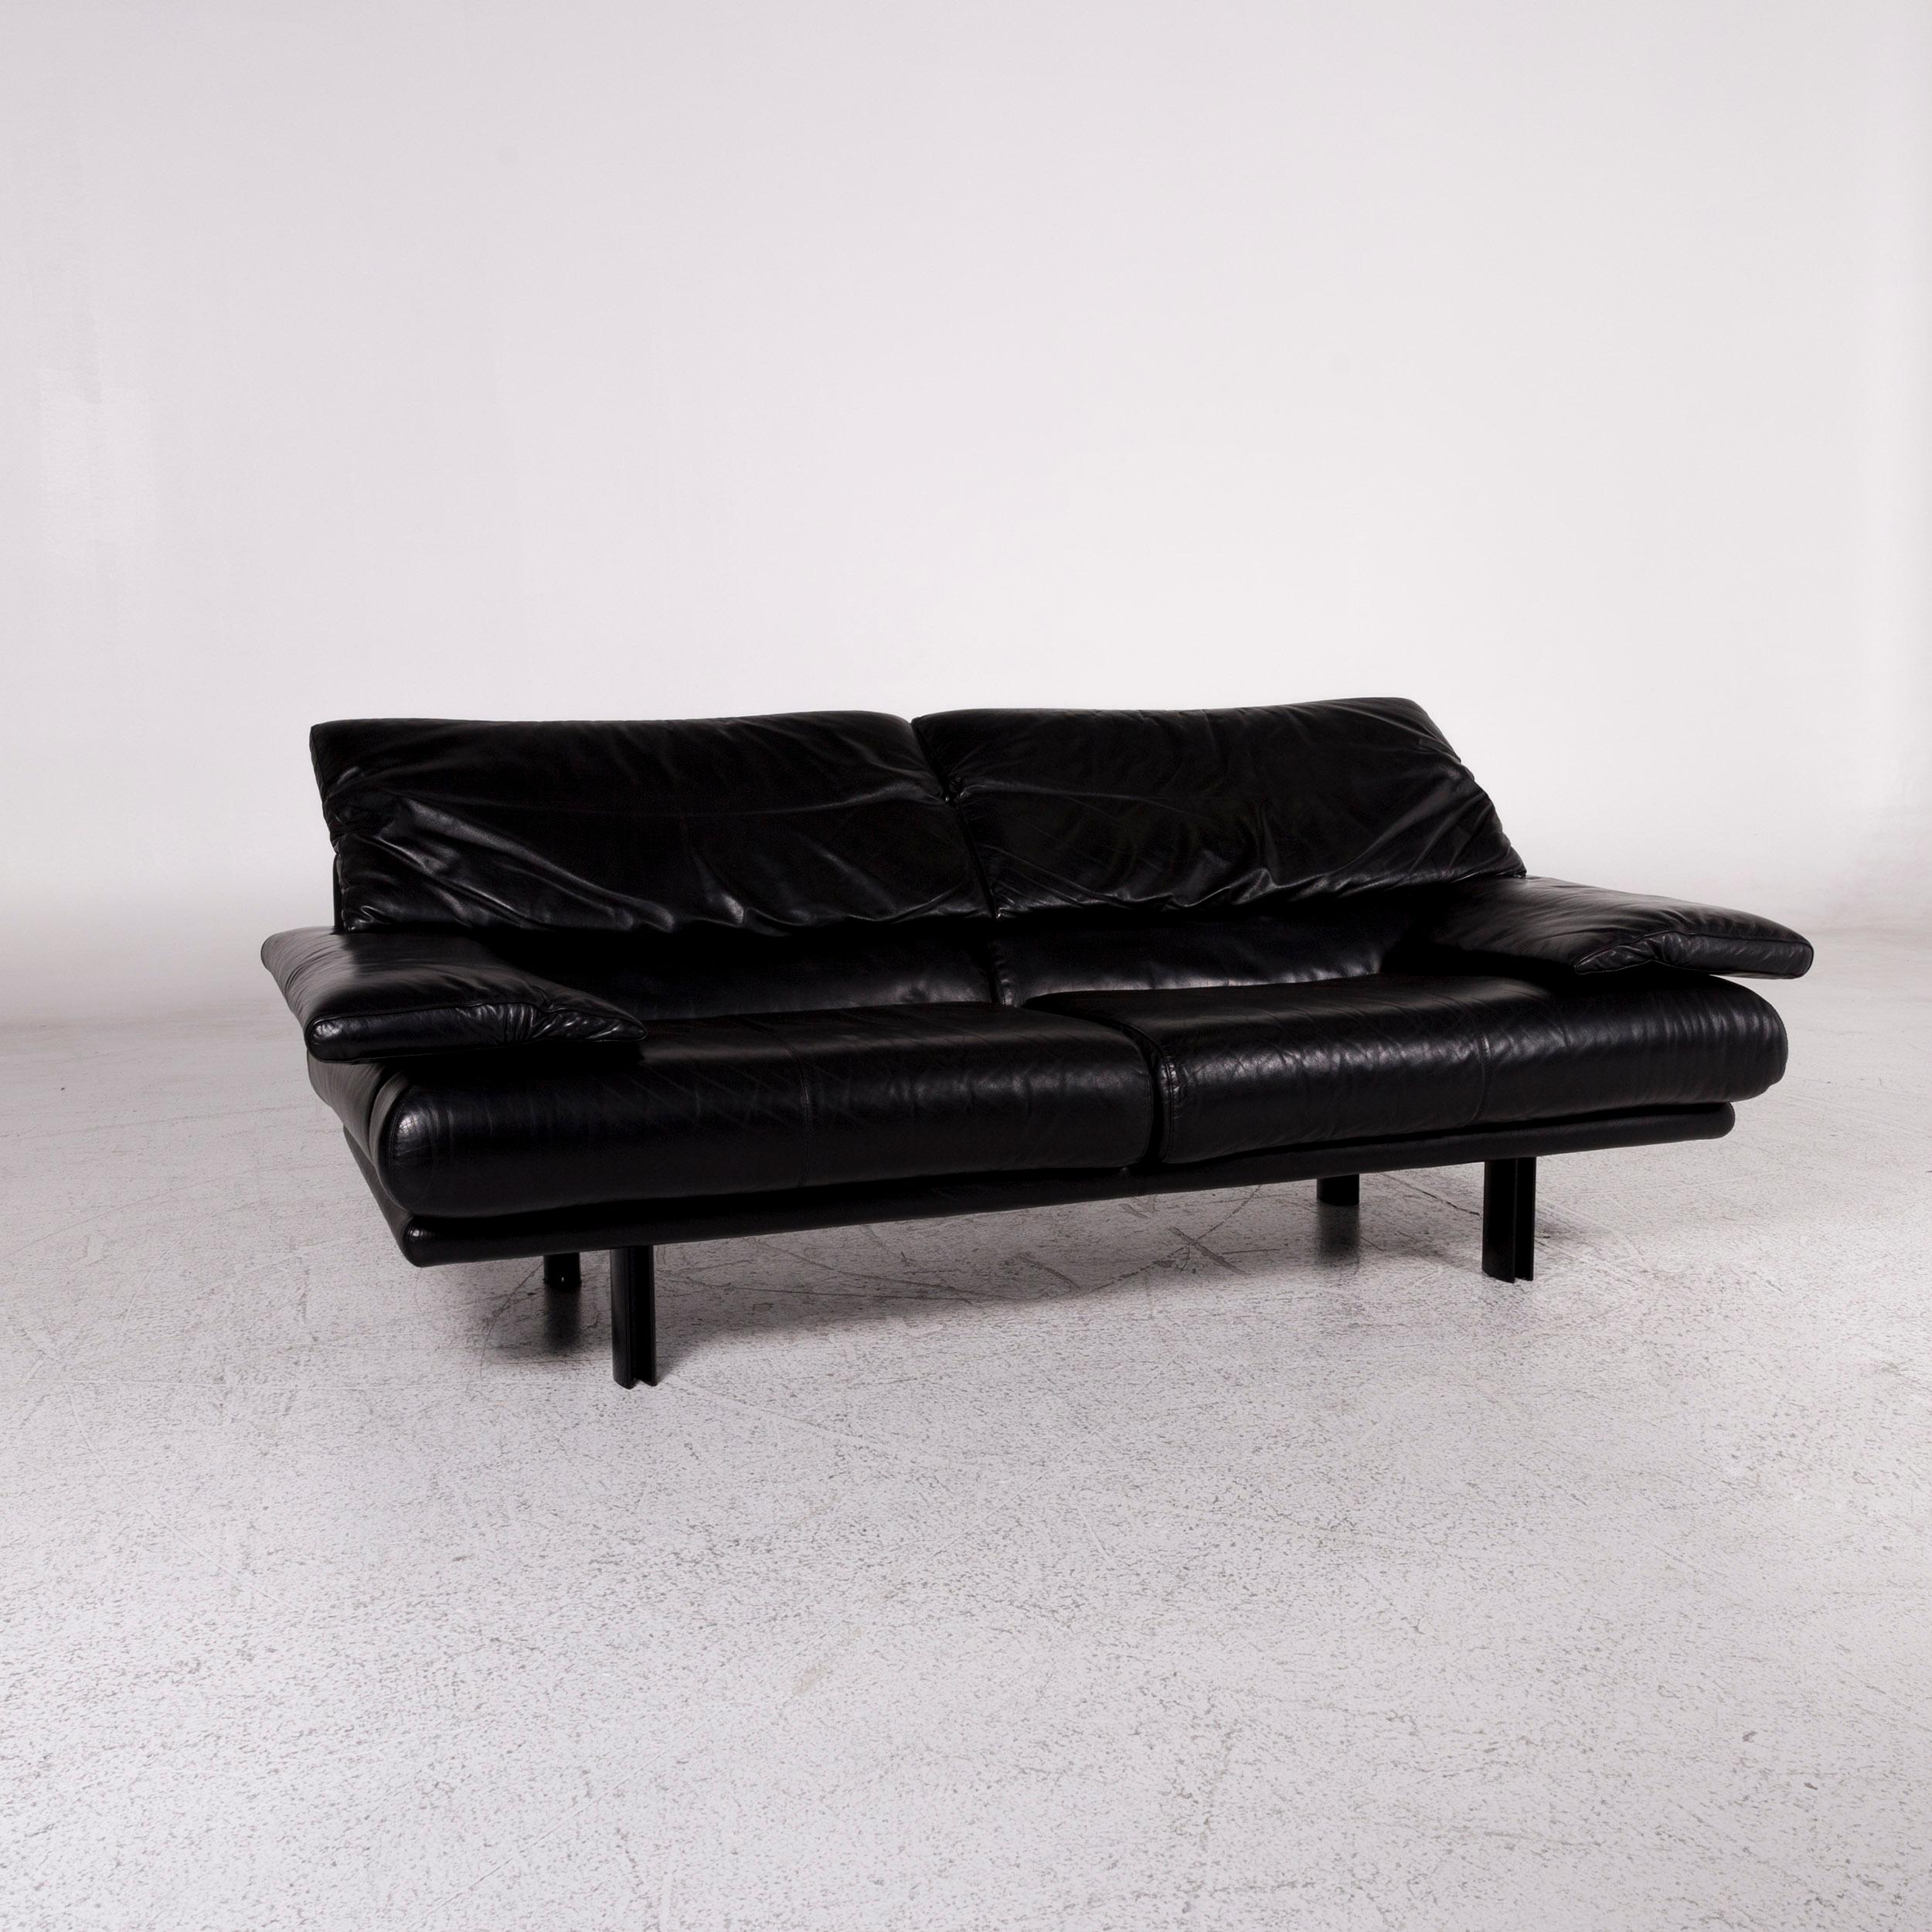 We bring to you a B & B Italia Alanda leather sofa set black 1 three-seat 1 two-seat.
 
Product measurements in centimetres:
 
Depth 90
Width 210
Height 73
Seat-height 45
Rest-height 53
Seat-depth 56
Seat-width 128
Back-height 31.
   